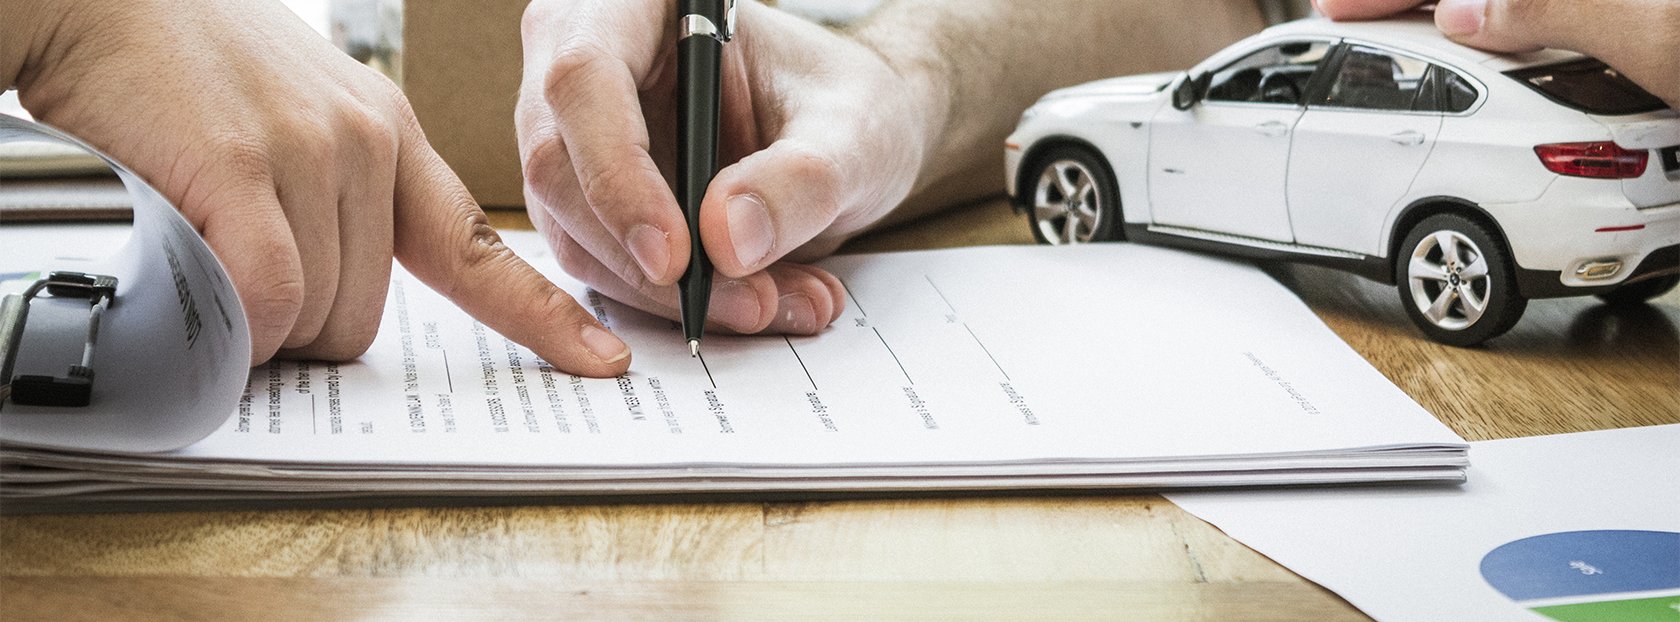 Can Vehicle Modifications Affect My Insurance?